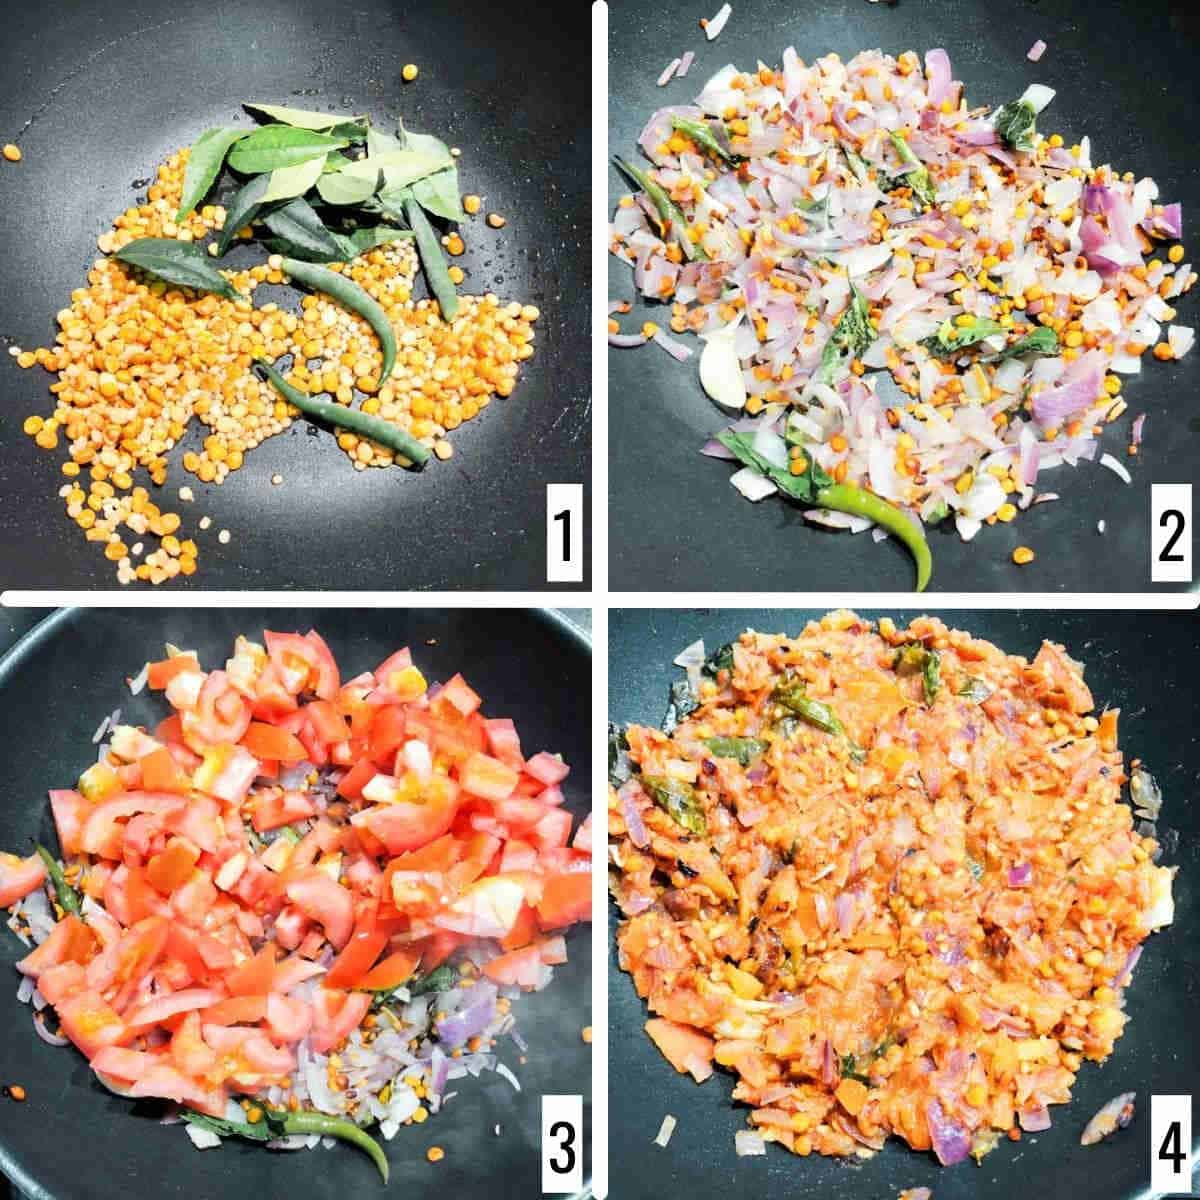 step-by-step photo to cook the lentils and vegetables.